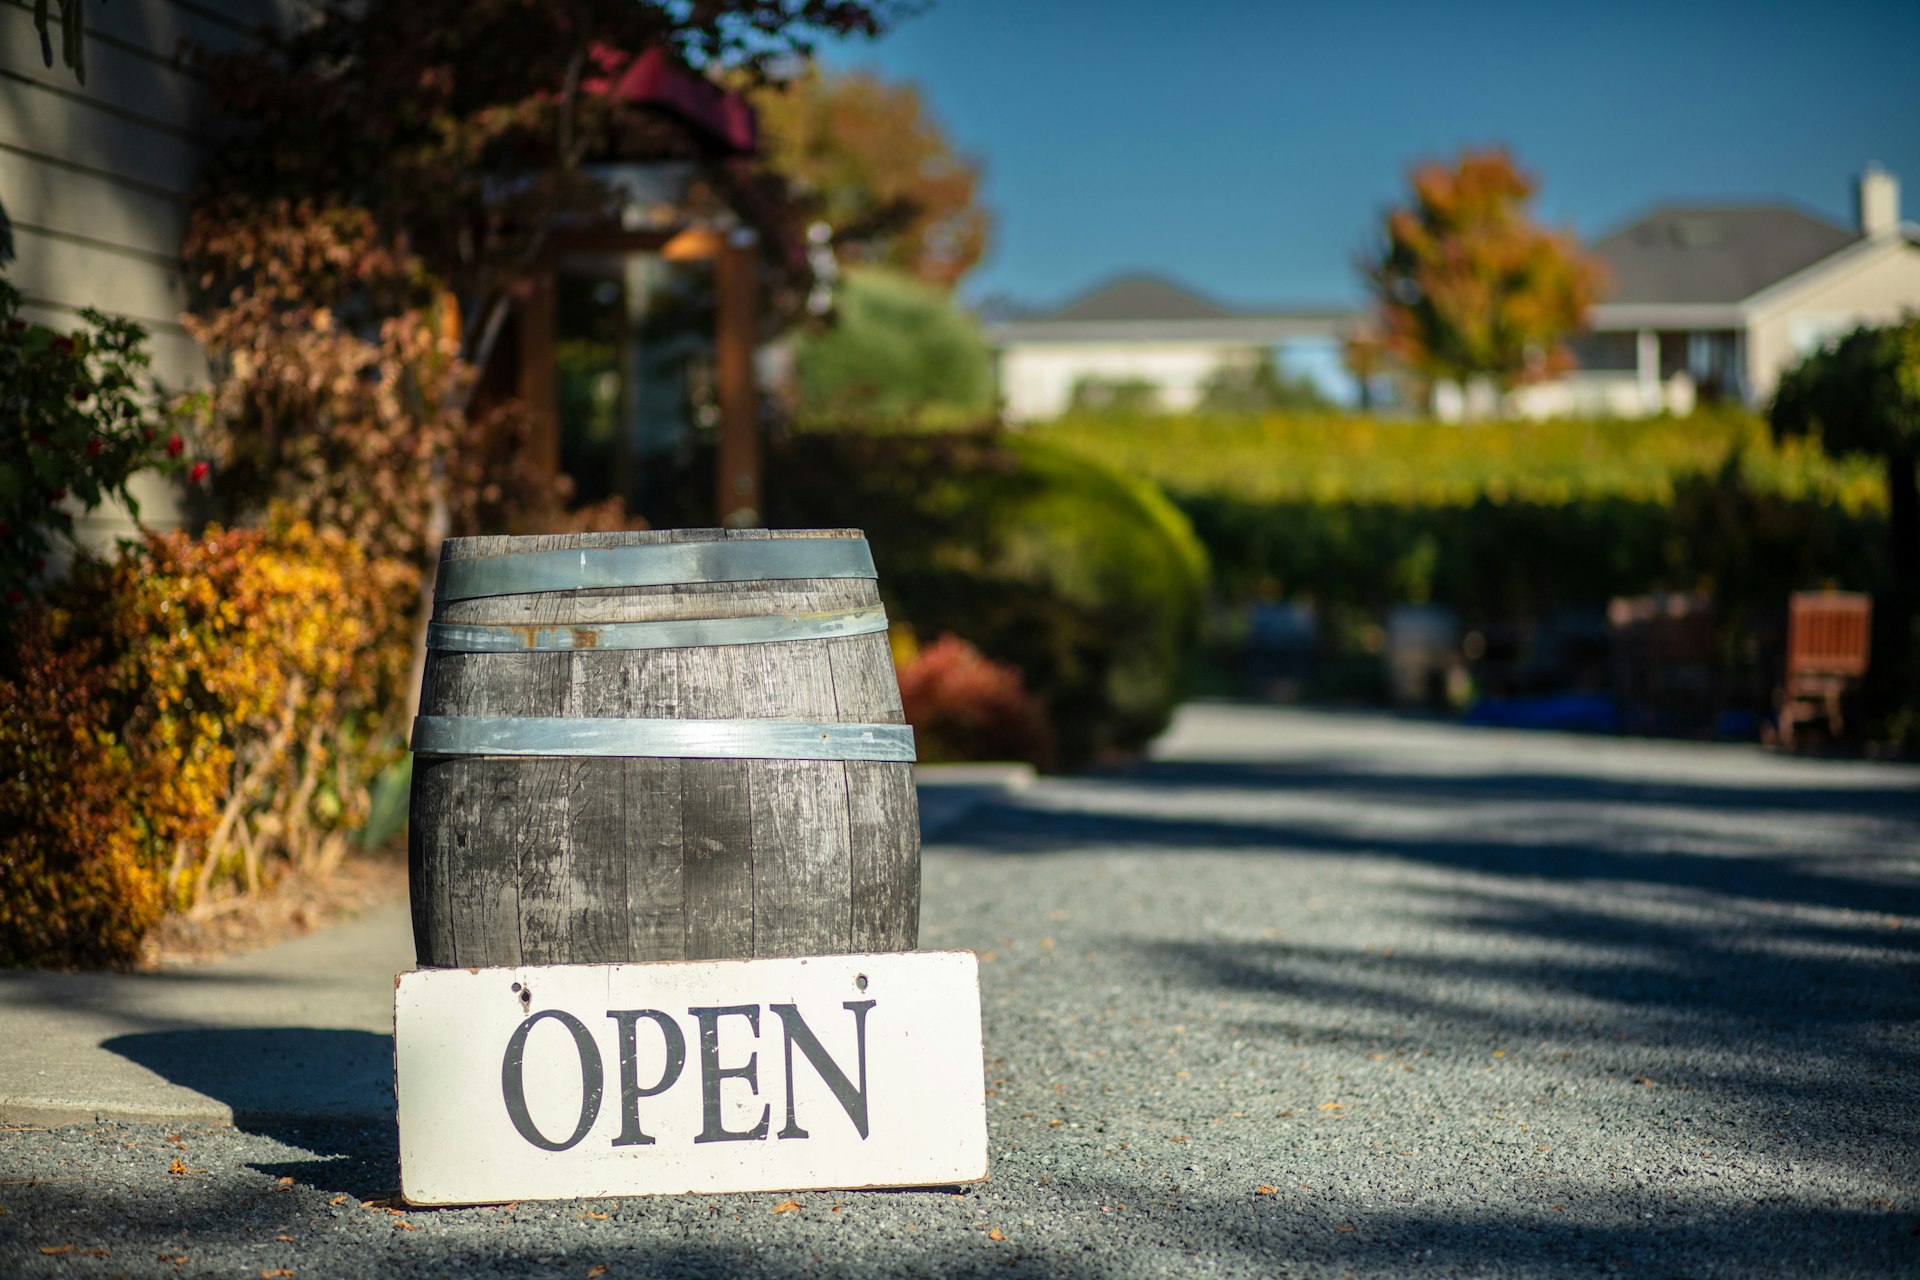 Decorative barrel of wine with an "Open" sign sitting in sunlight next to a vineyard